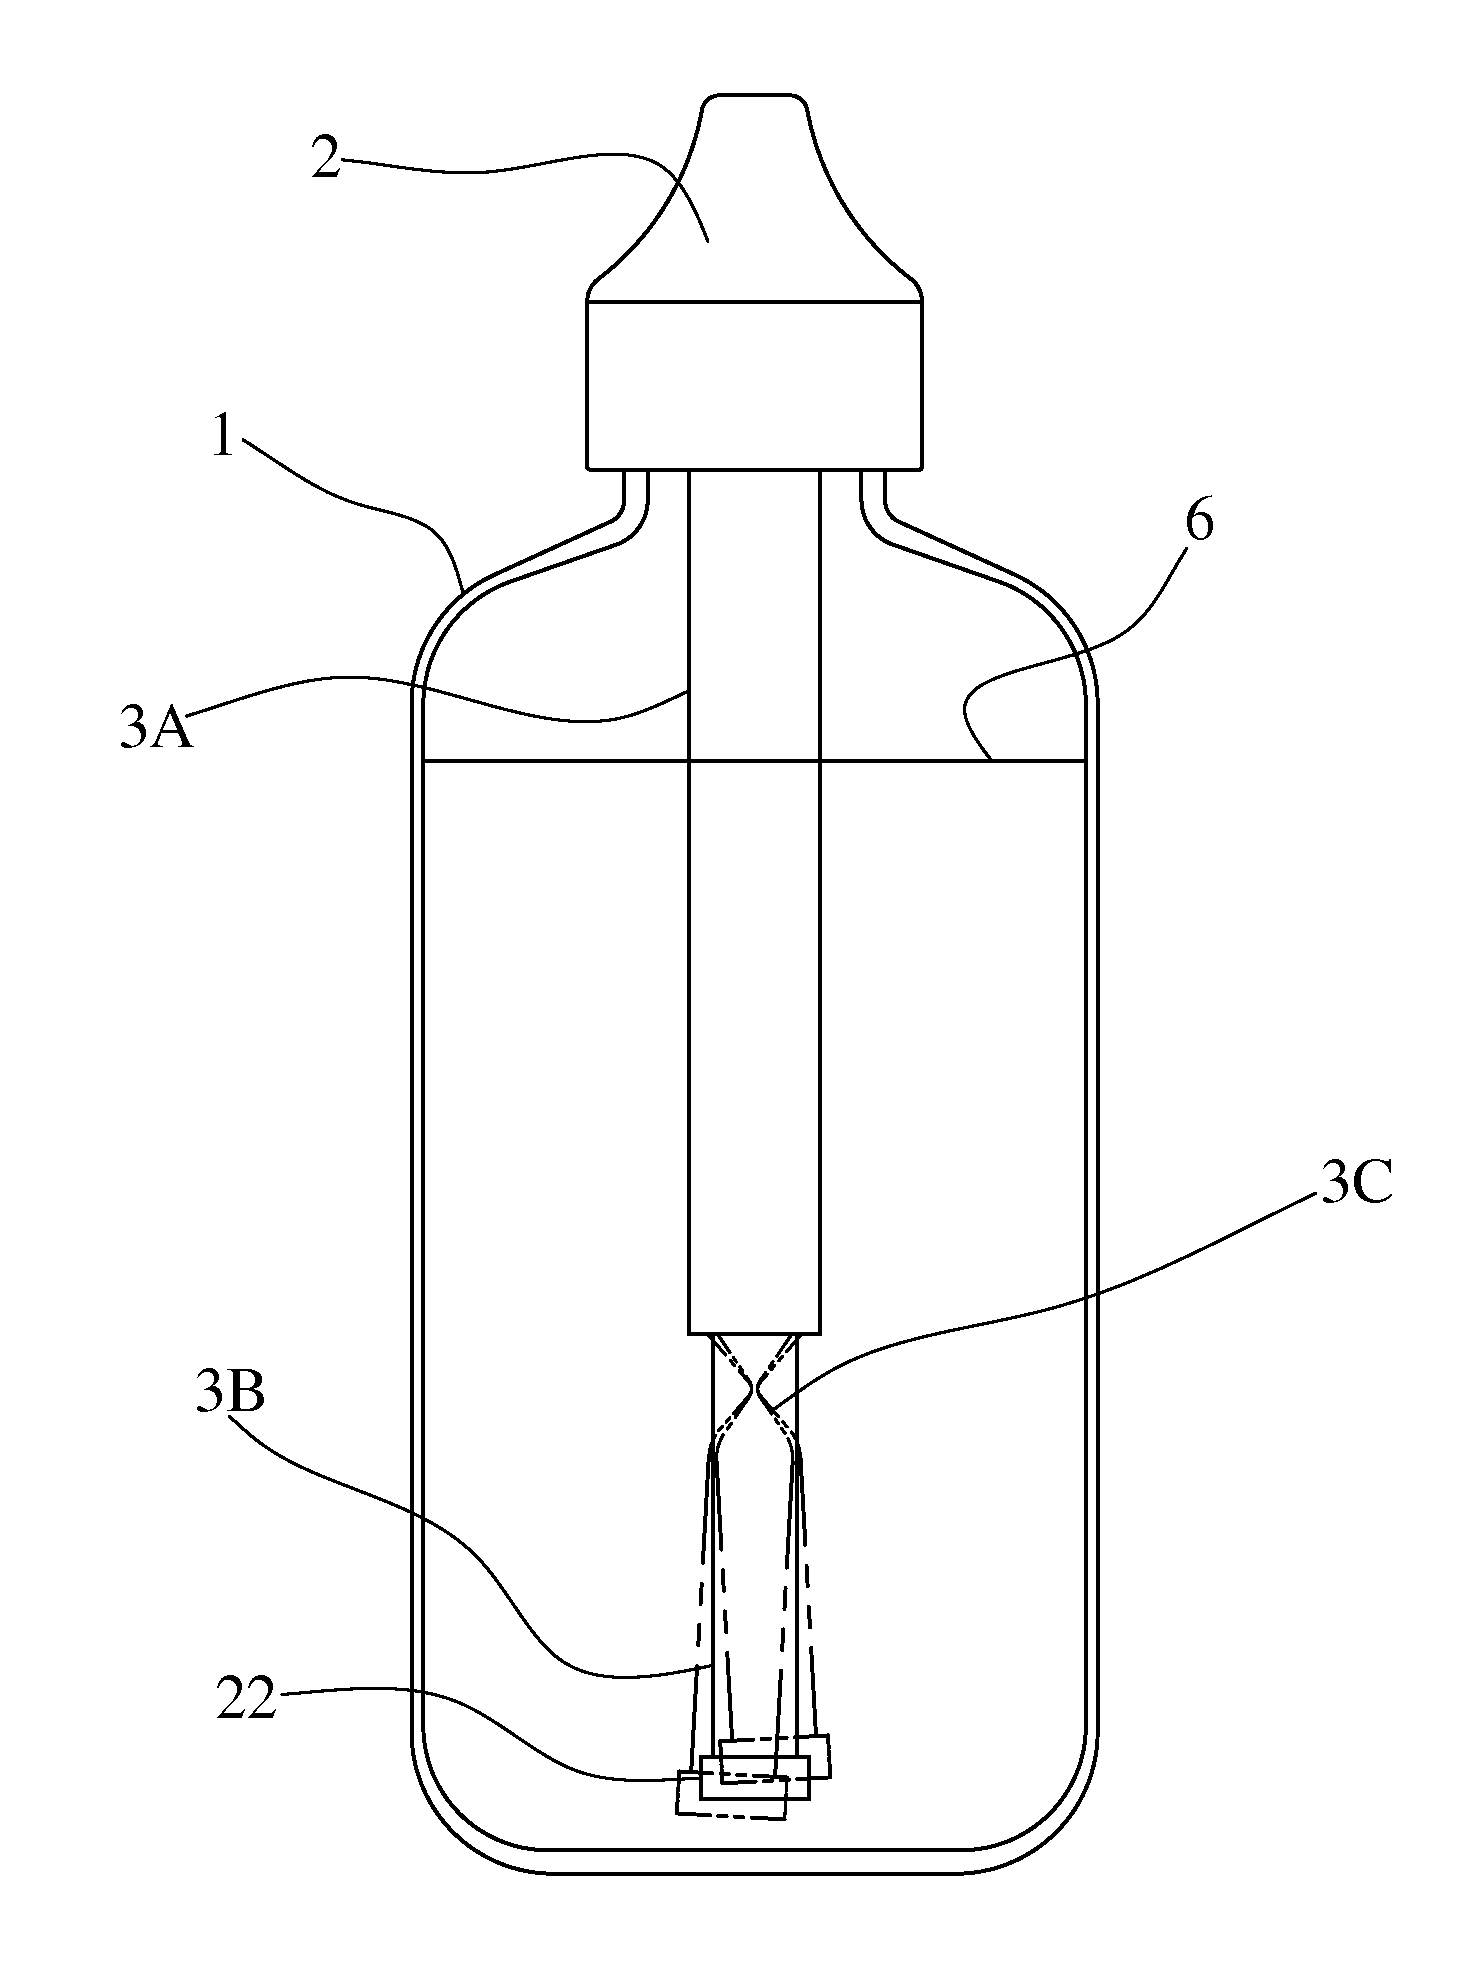 High flow volume nasal irrigation device and method for alternating pulsatile and continuous fluid flow